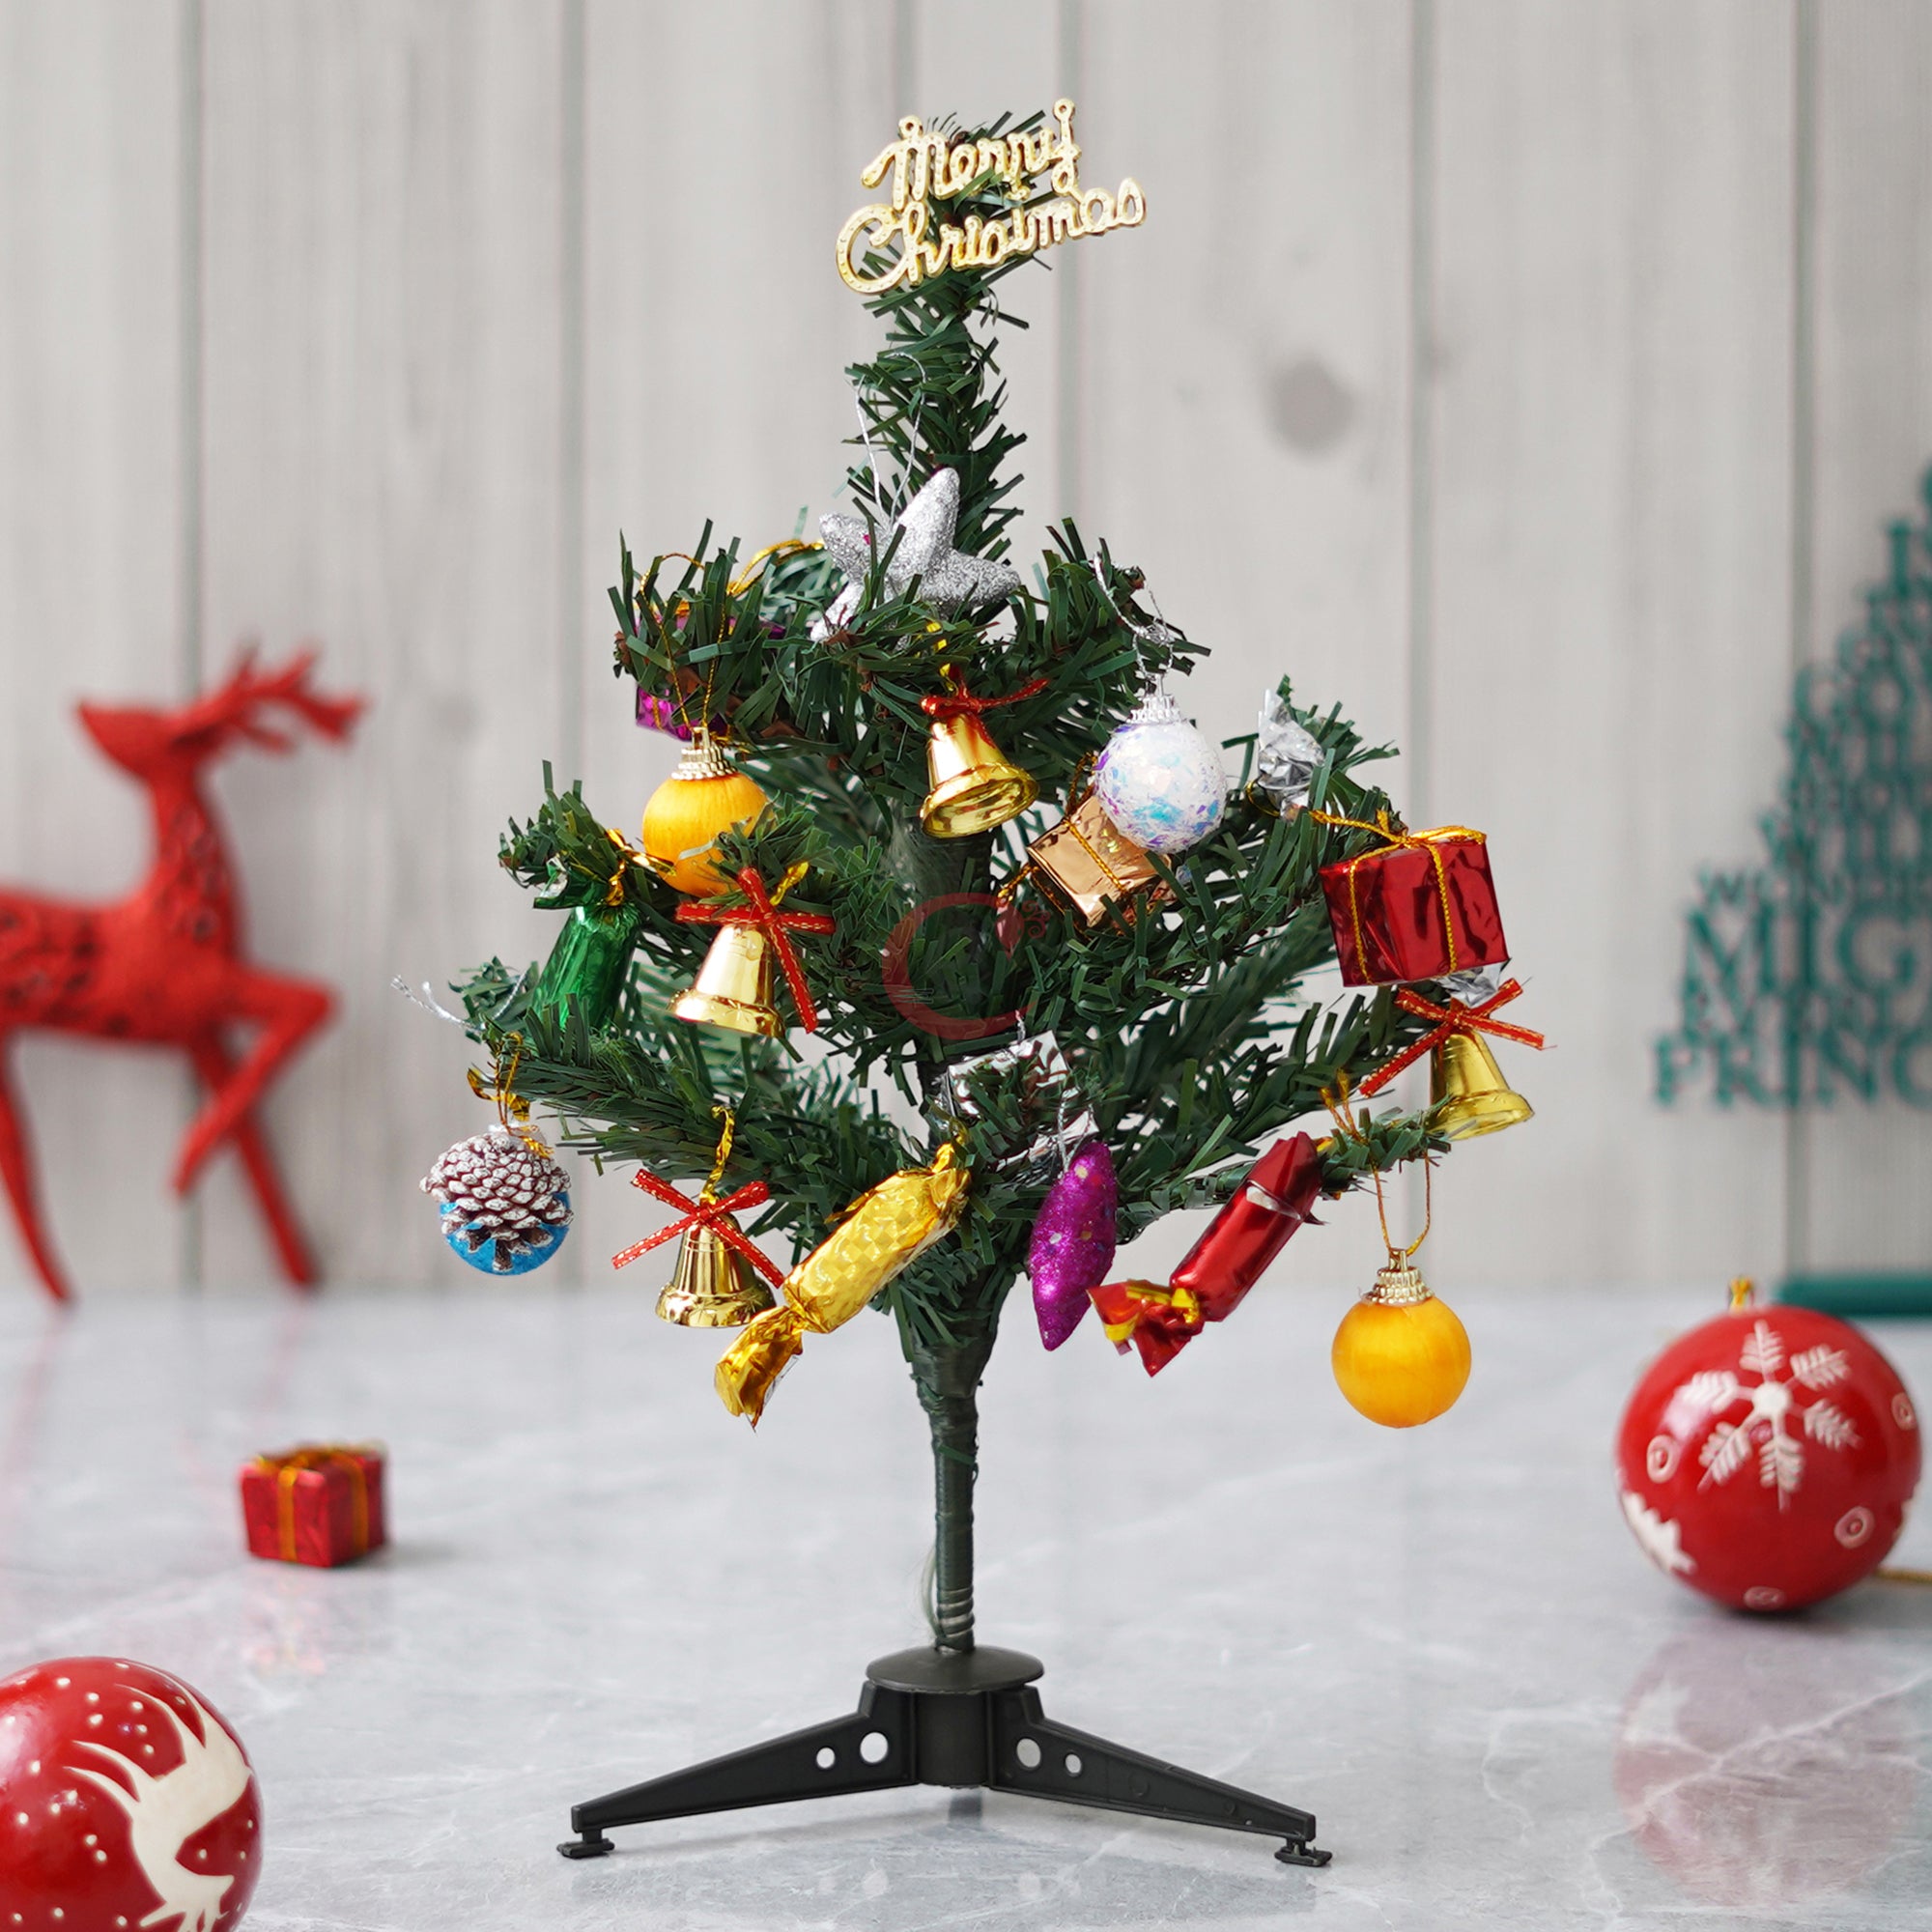 eCraftIndia 1 Feet Green Artificial Christmas Tree Xmas Pine Tree with Metal Stand - Xmas Tree for Indoor, Outdoor, Home, Living Room, Office, Church Decor - Merry Christmas Decoration Item 4